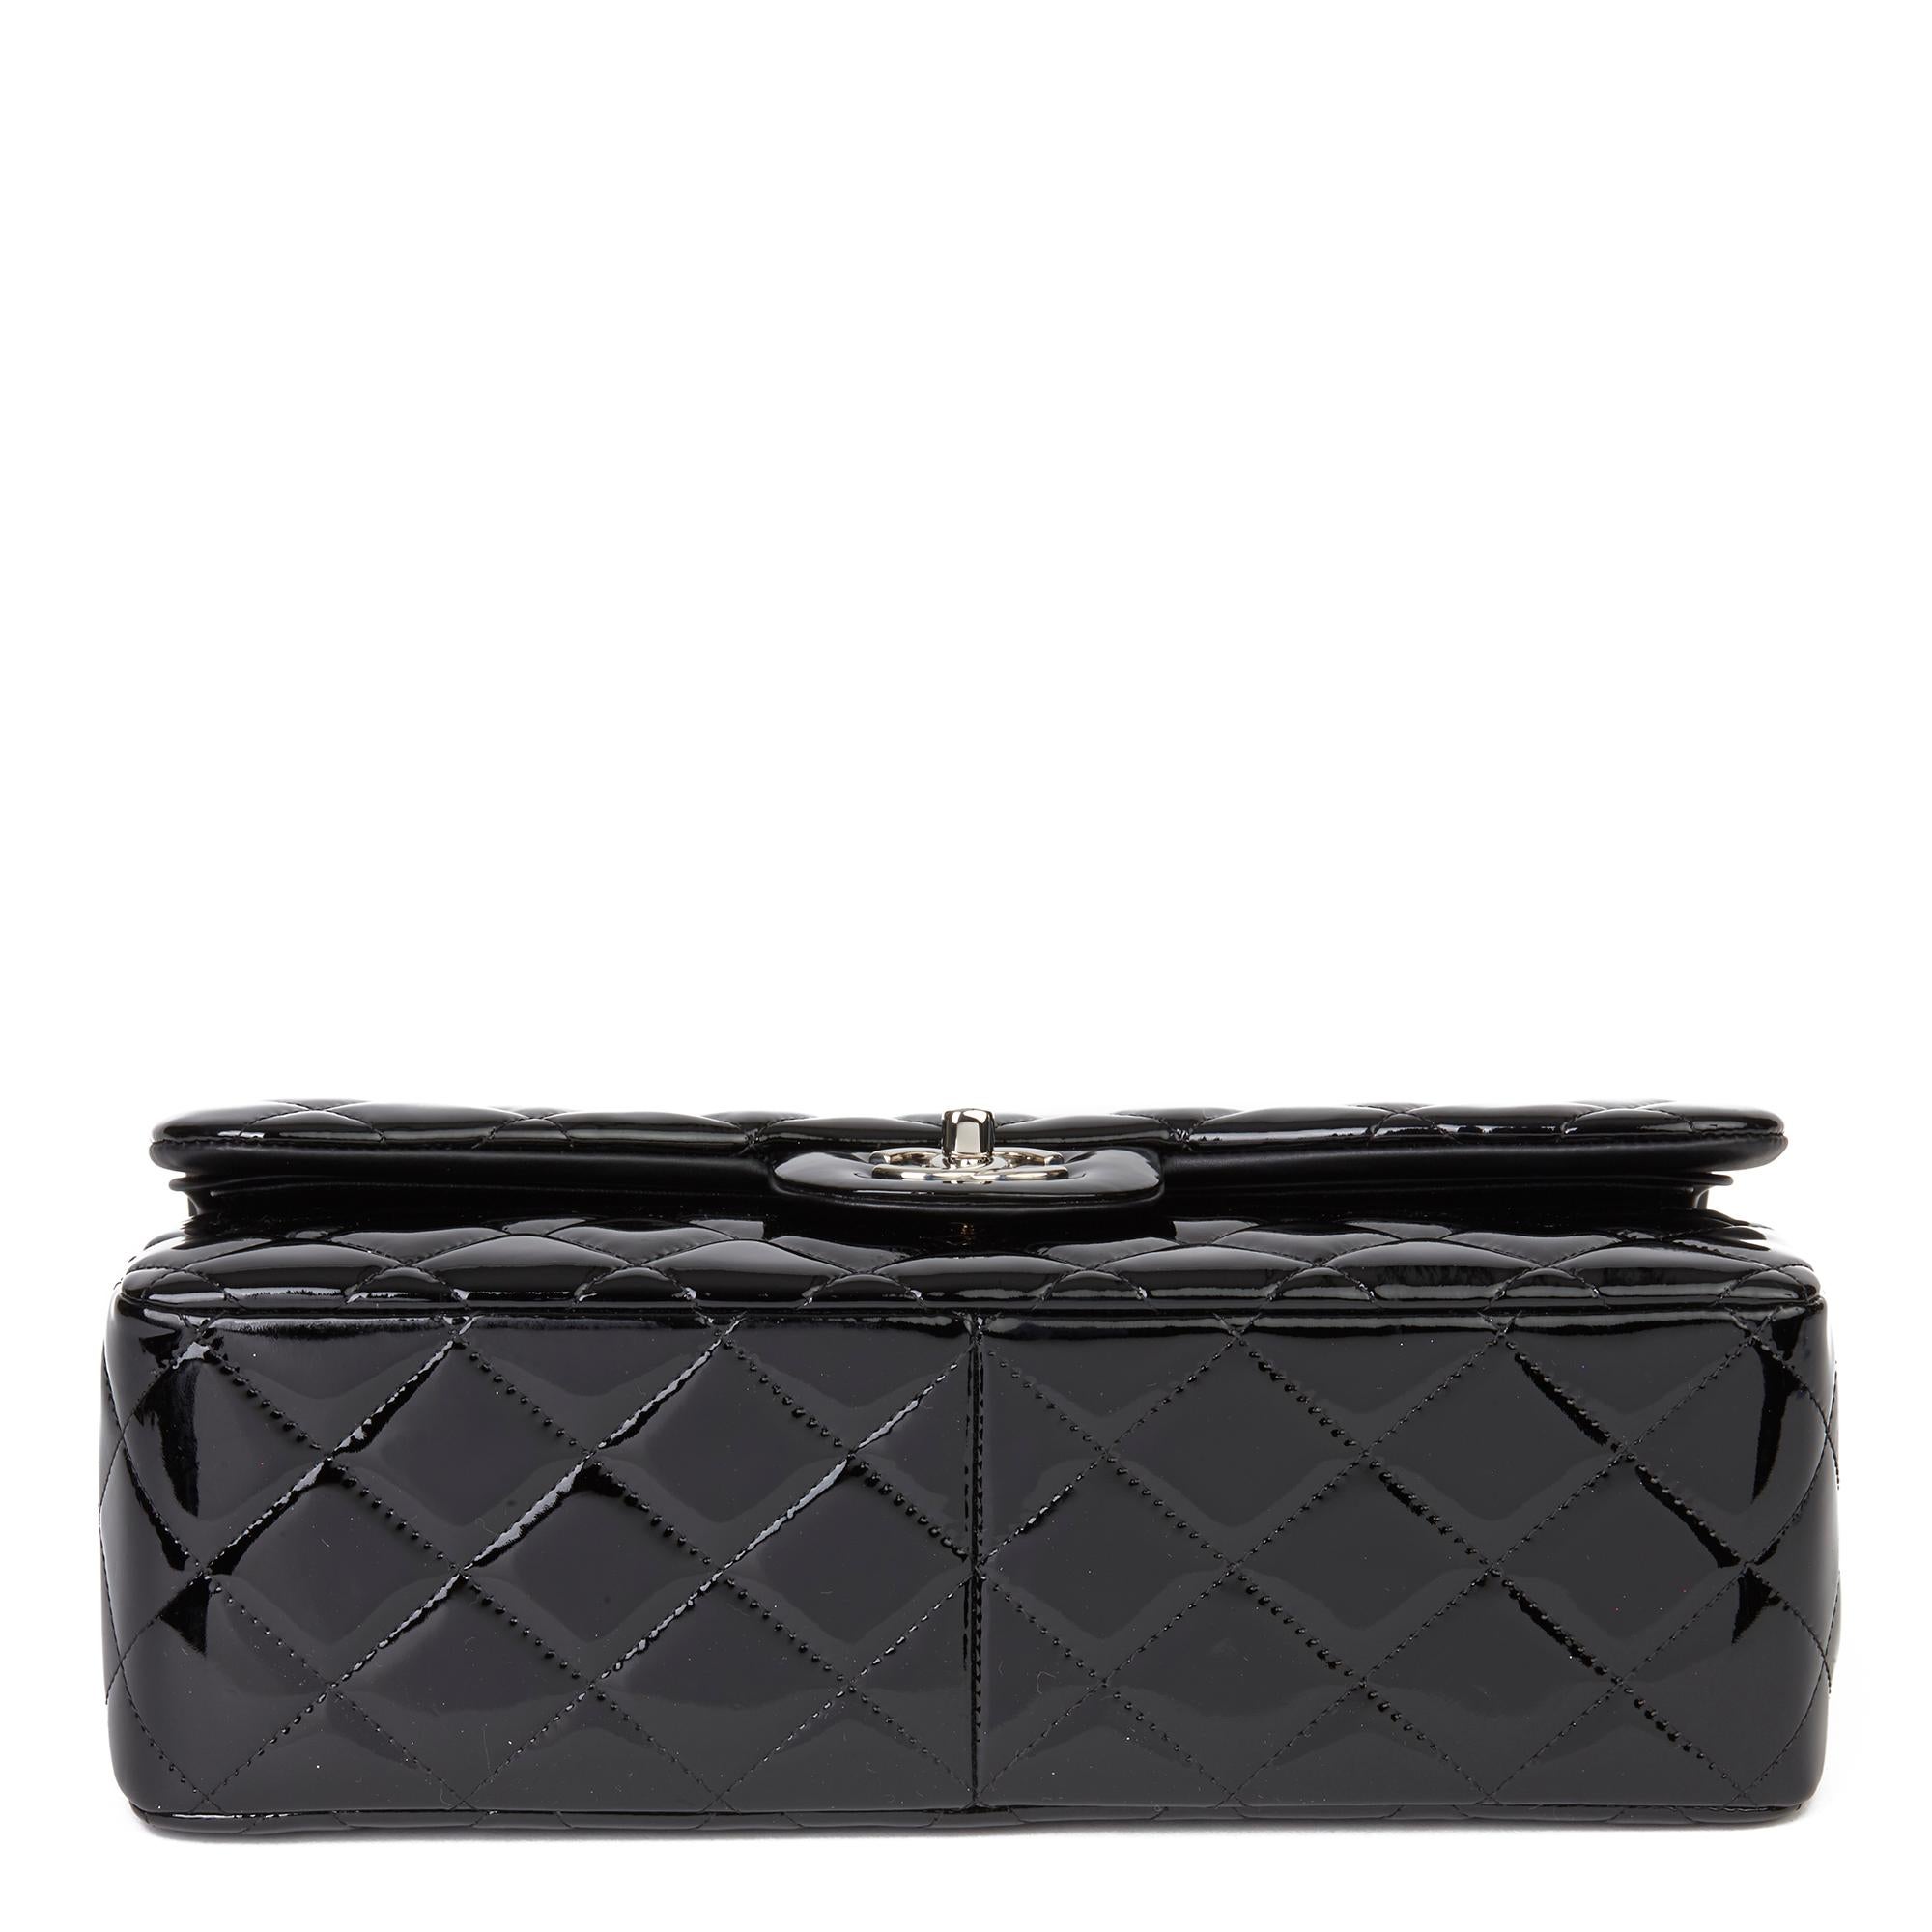 2016 Chanel Black Quilted Patent Leather Jumbo Double Flap Bag 1